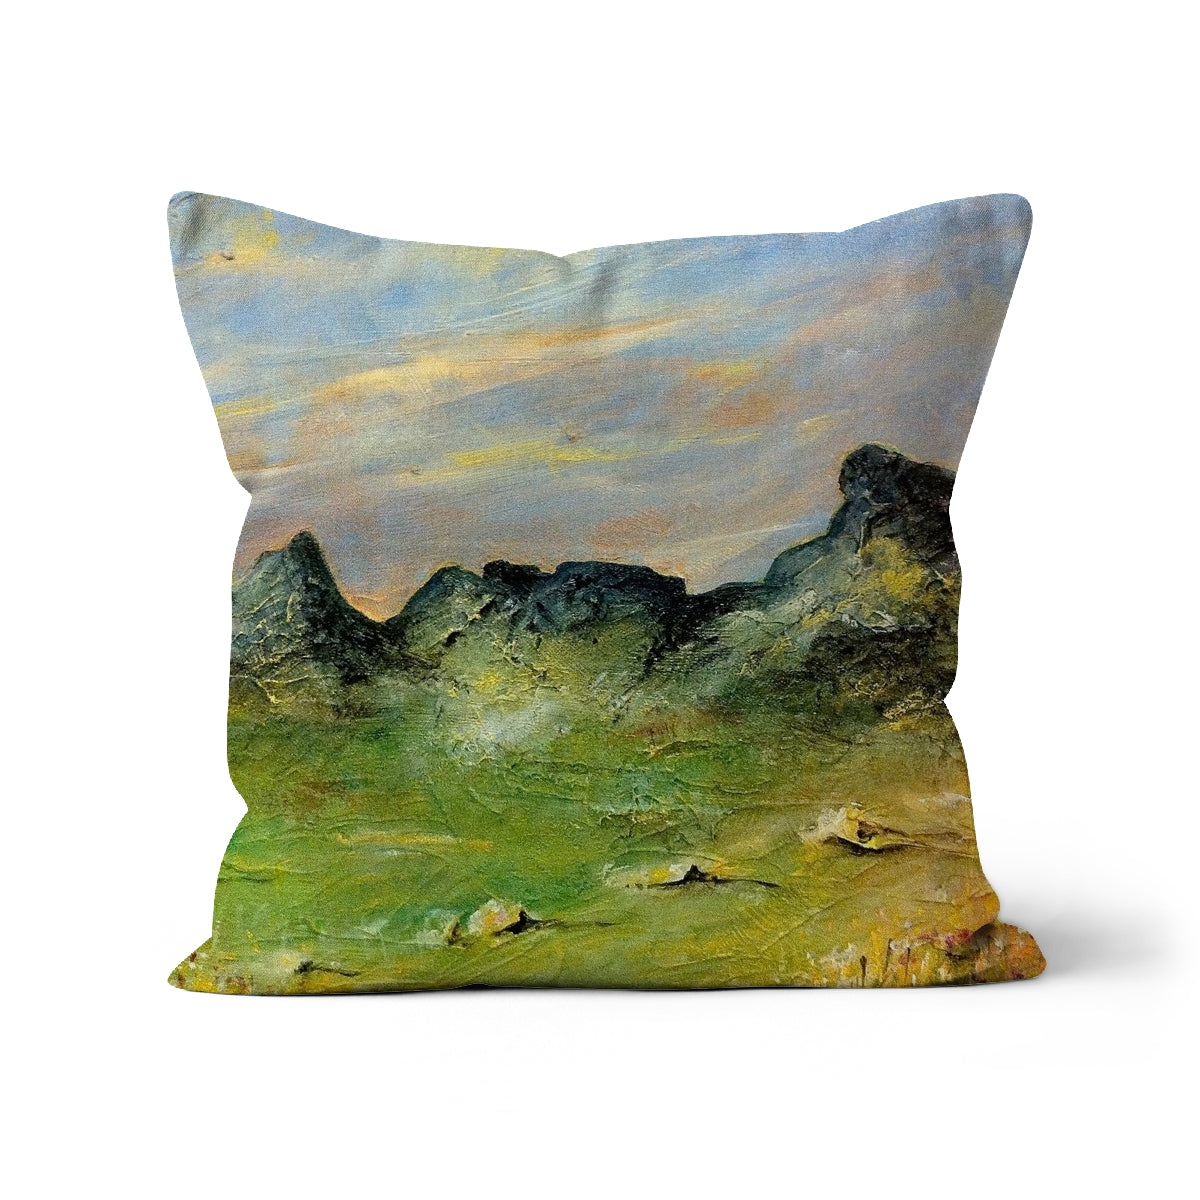 The Cobbler Art Gifts Cushion-Cushions-Scottish Lochs & Mountains Art Gallery-Linen-12"x12"-Paintings, Prints, Homeware, Art Gifts From Scotland By Scottish Artist Kevin Hunter